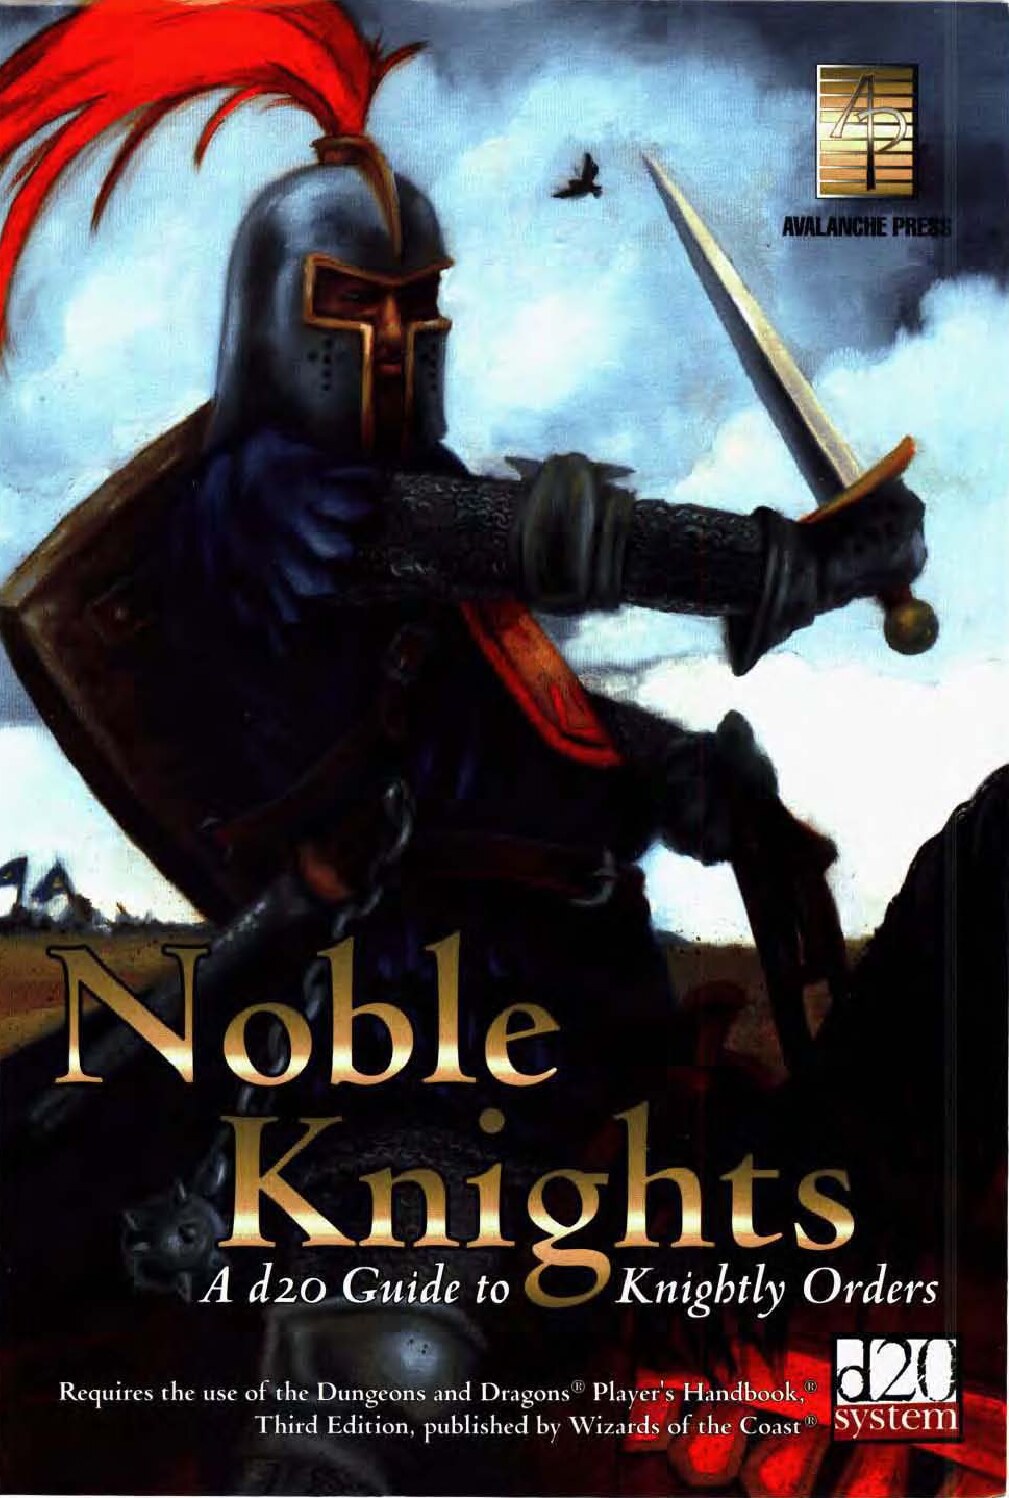 Noble Knights - A d20 Guide to Knightly Orders